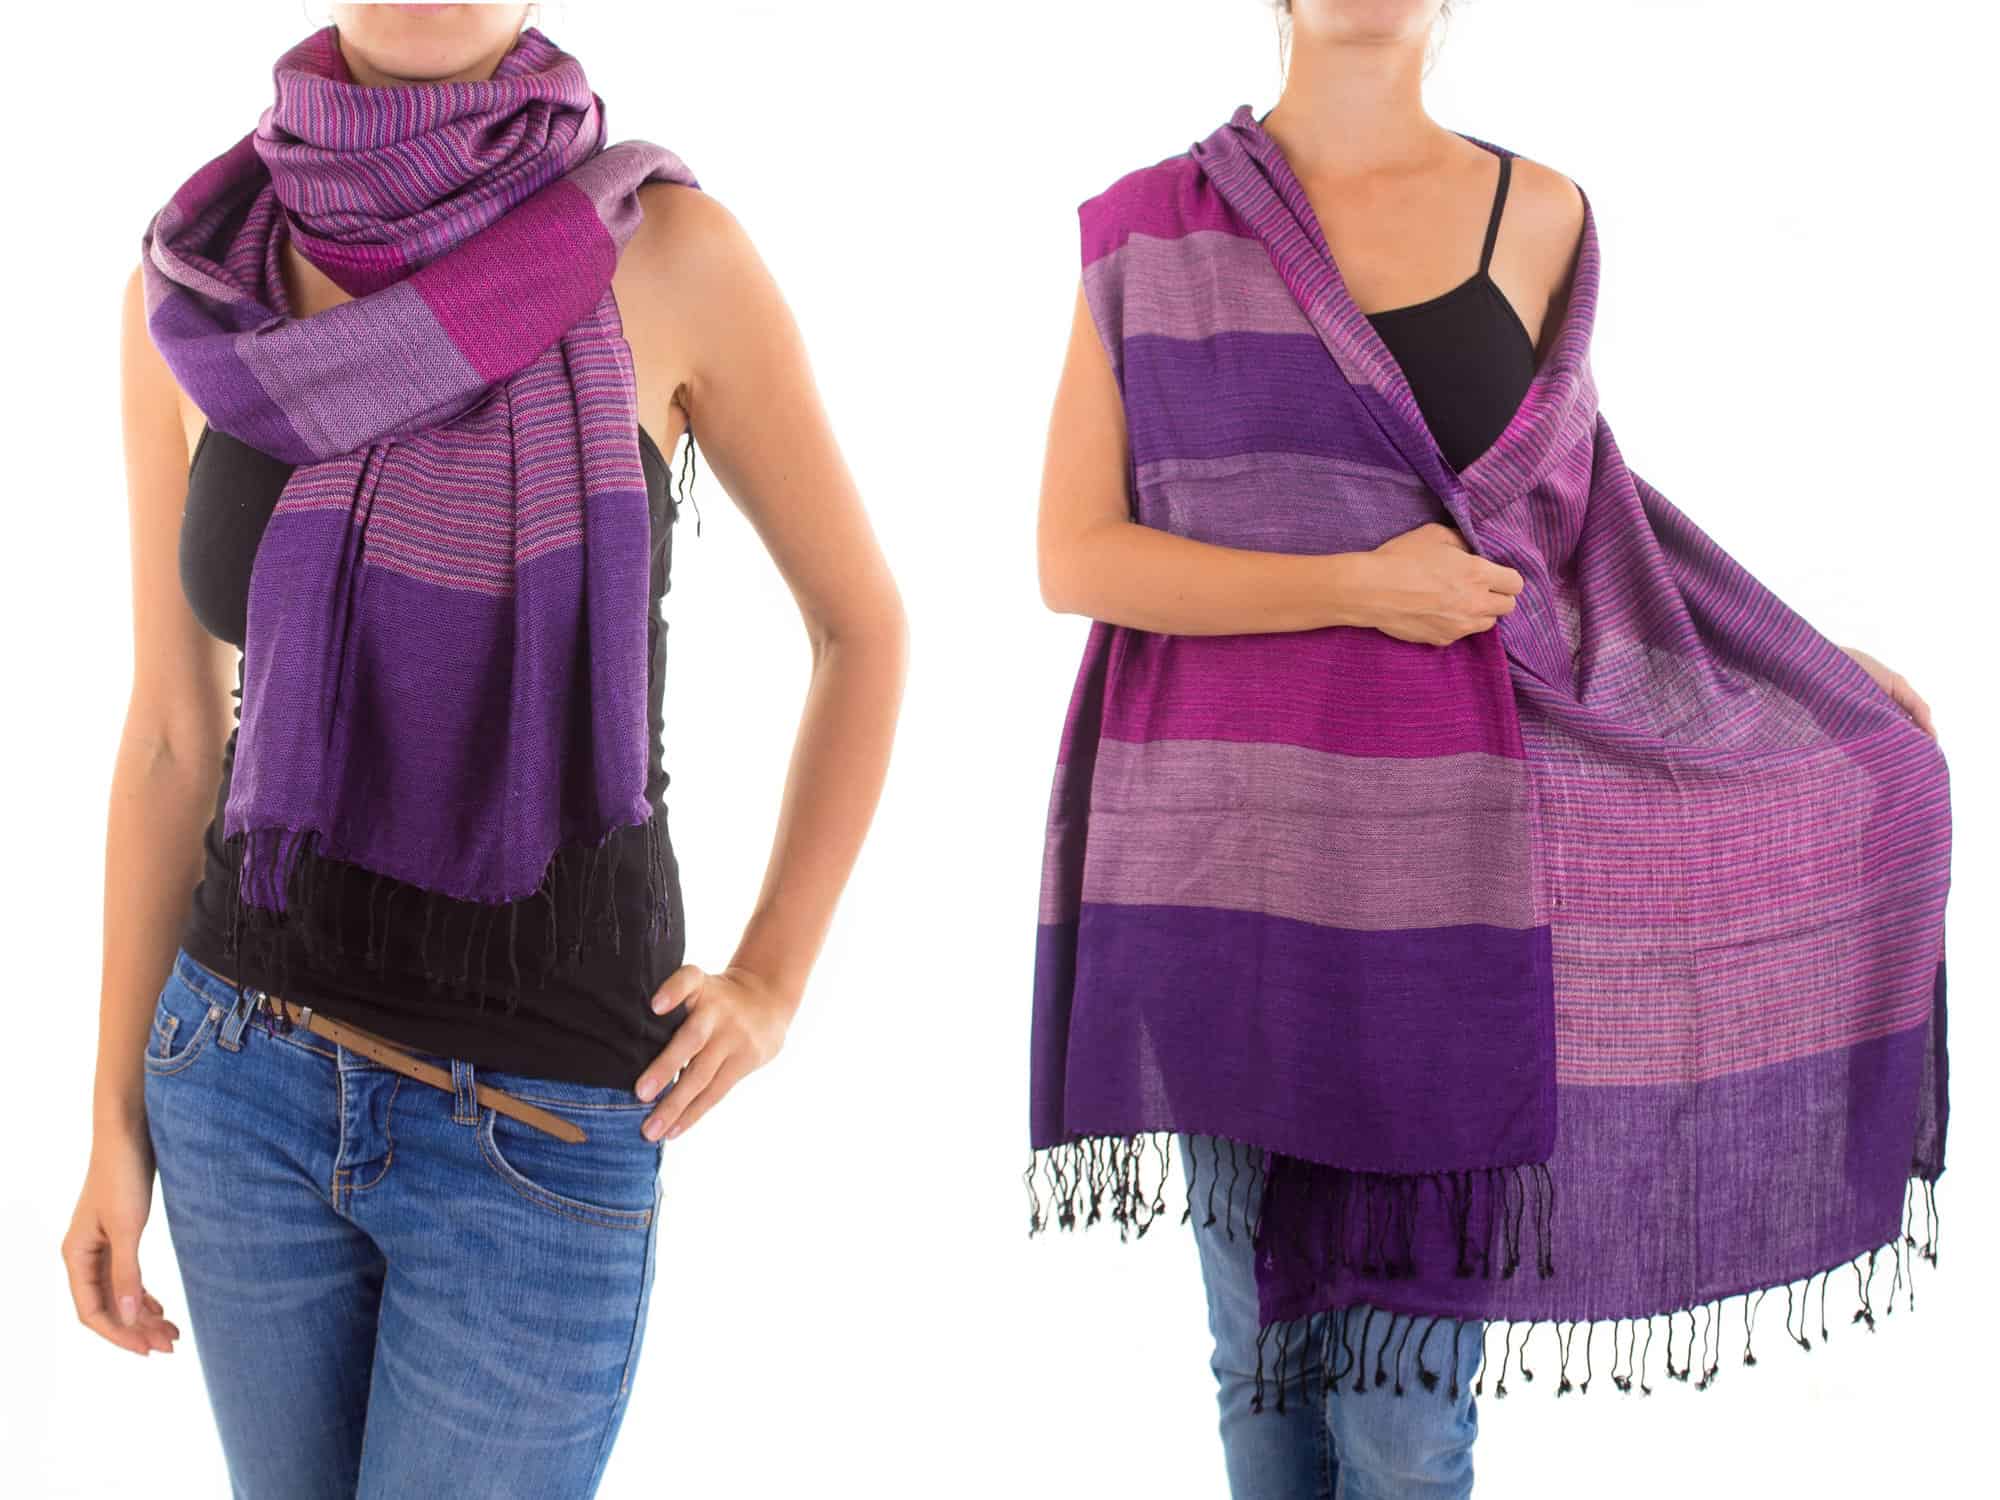 <p>“A big thin scarf,” said one. “Super versatile: can use it to cover yourself up from the sun or mild rain, as a makeshift (sitting) blanket, as padding in your bag, as a neck support in the plane, and to cover up your neck if the night bus air conditioning is too intense.</p> <p>Also, for women in certain countries when they need to cover up their shoulders when entering a temple, etc. If you think about it, a scarf is like a towel, the most massively useful thing a traveler can carry.”</p>